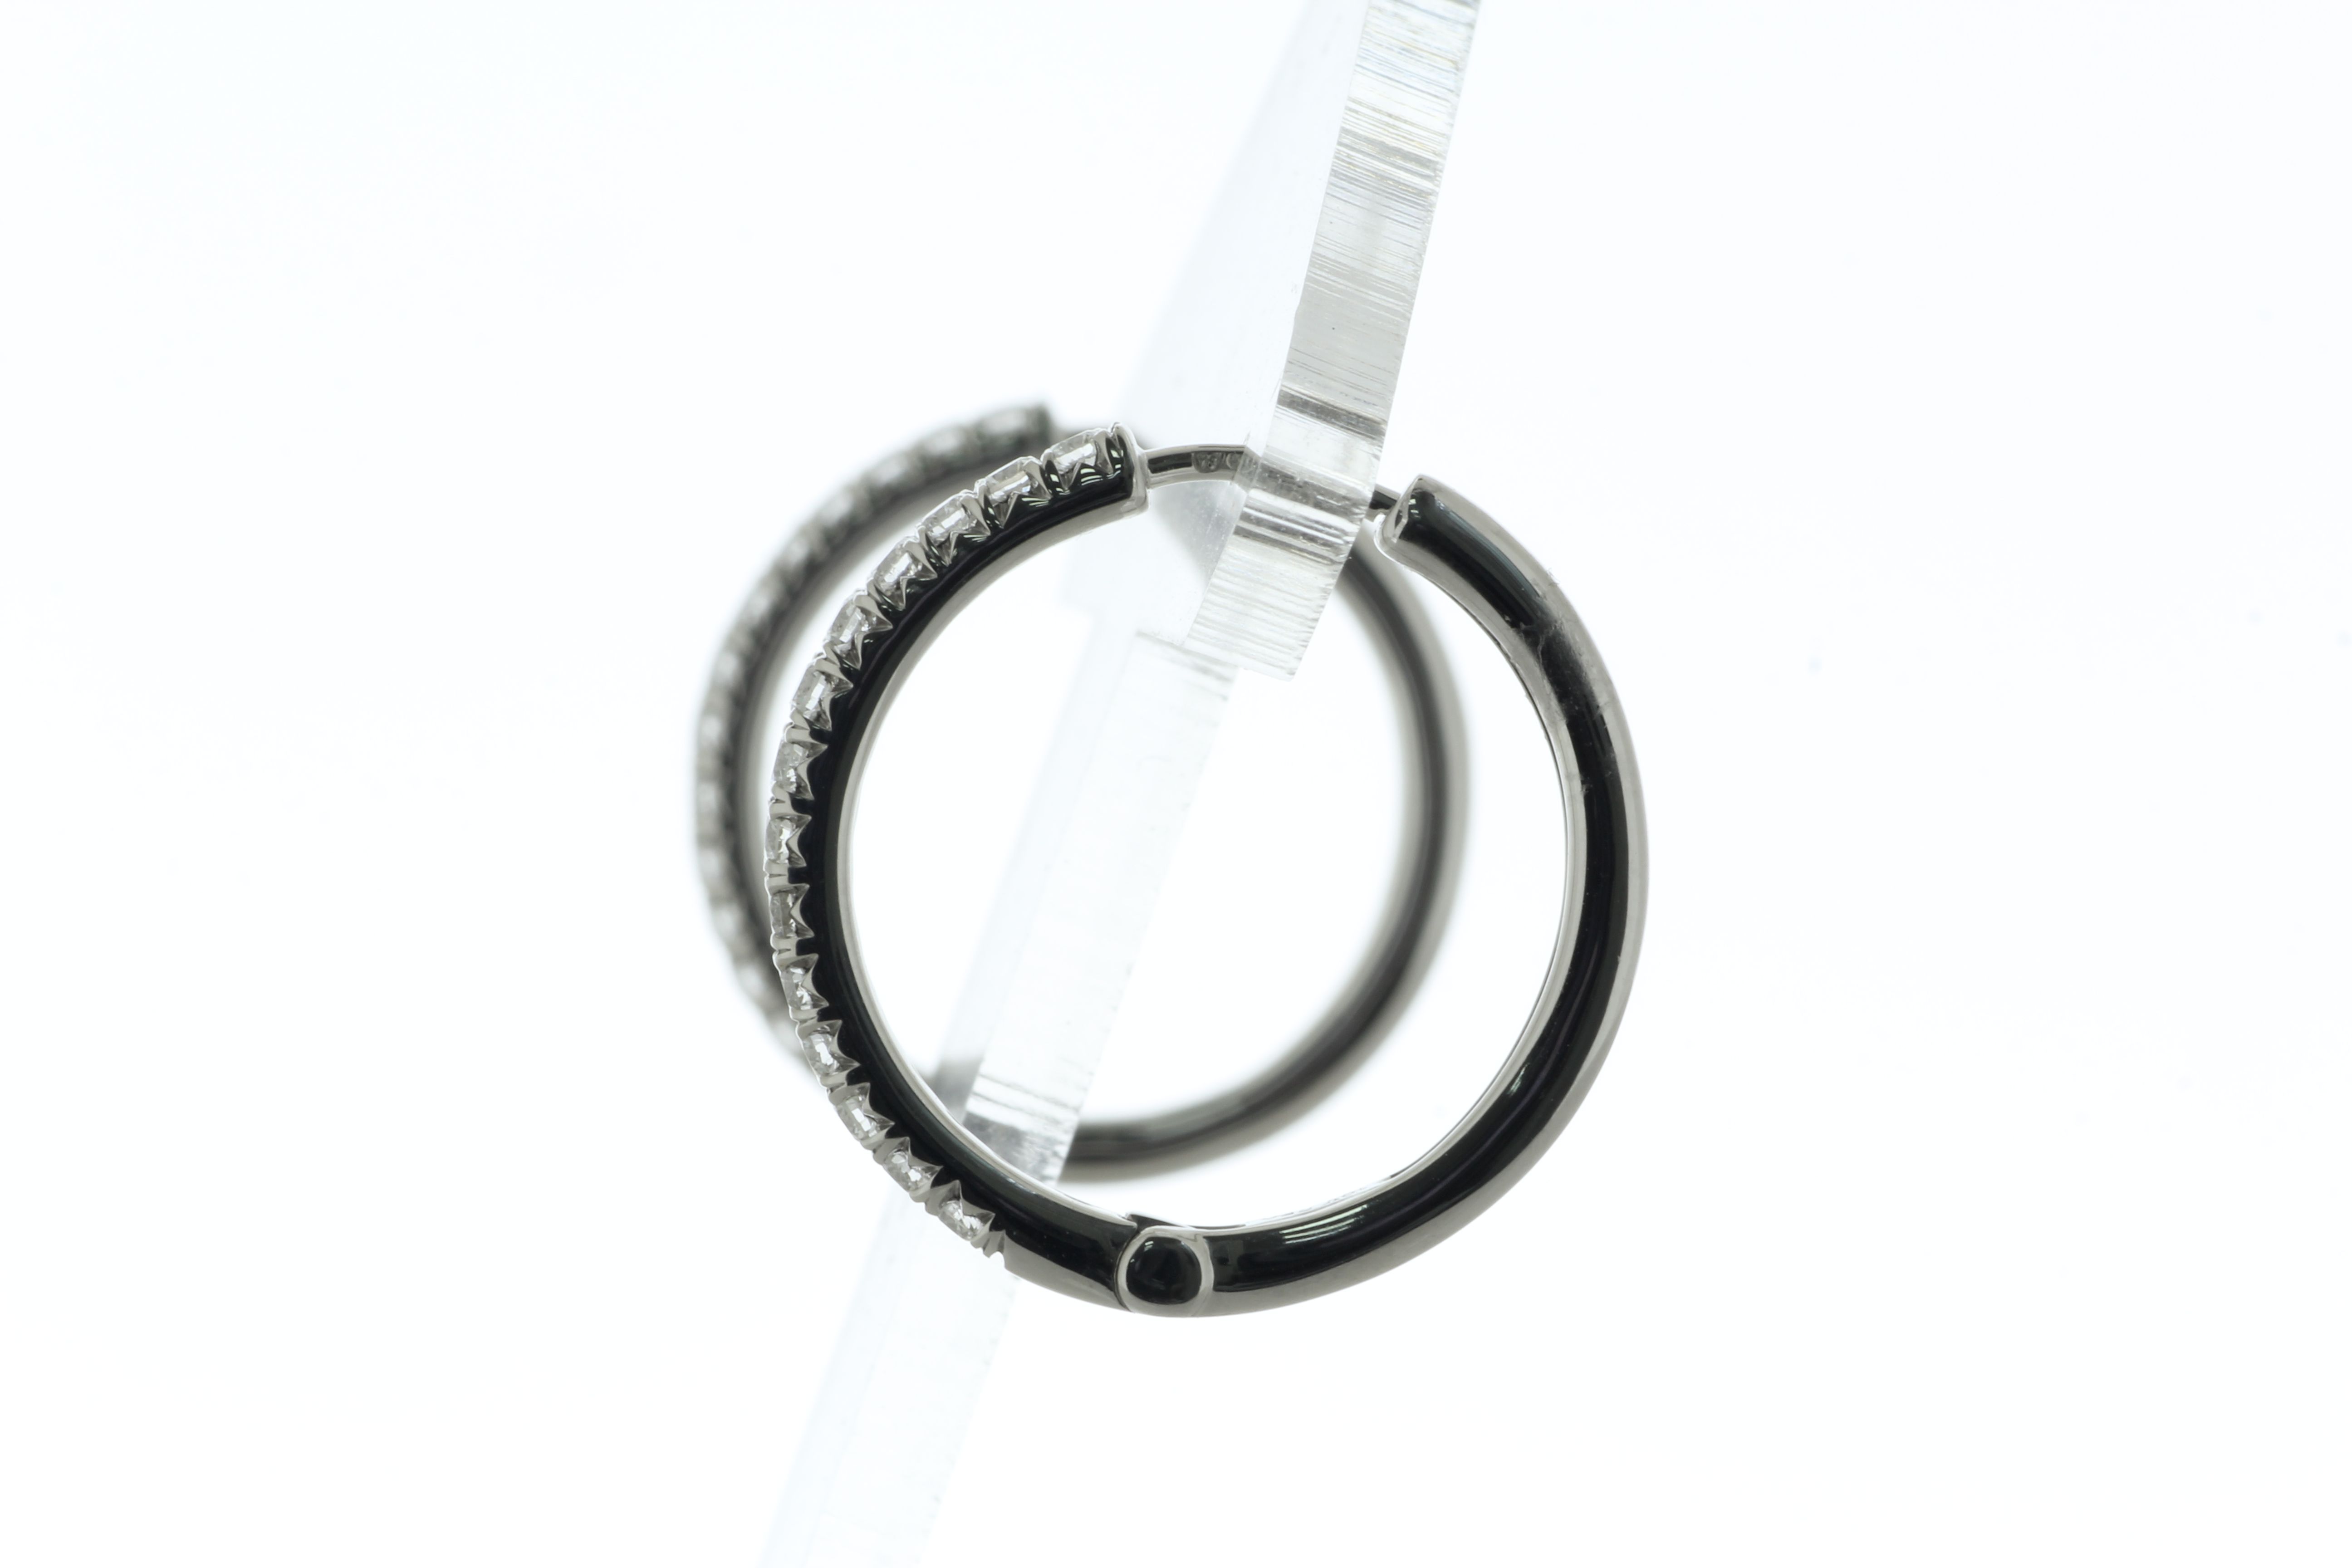 18ct White Gold Claw Set Hoop Diamond Earring 0.52 Carats - Image 3 of 5